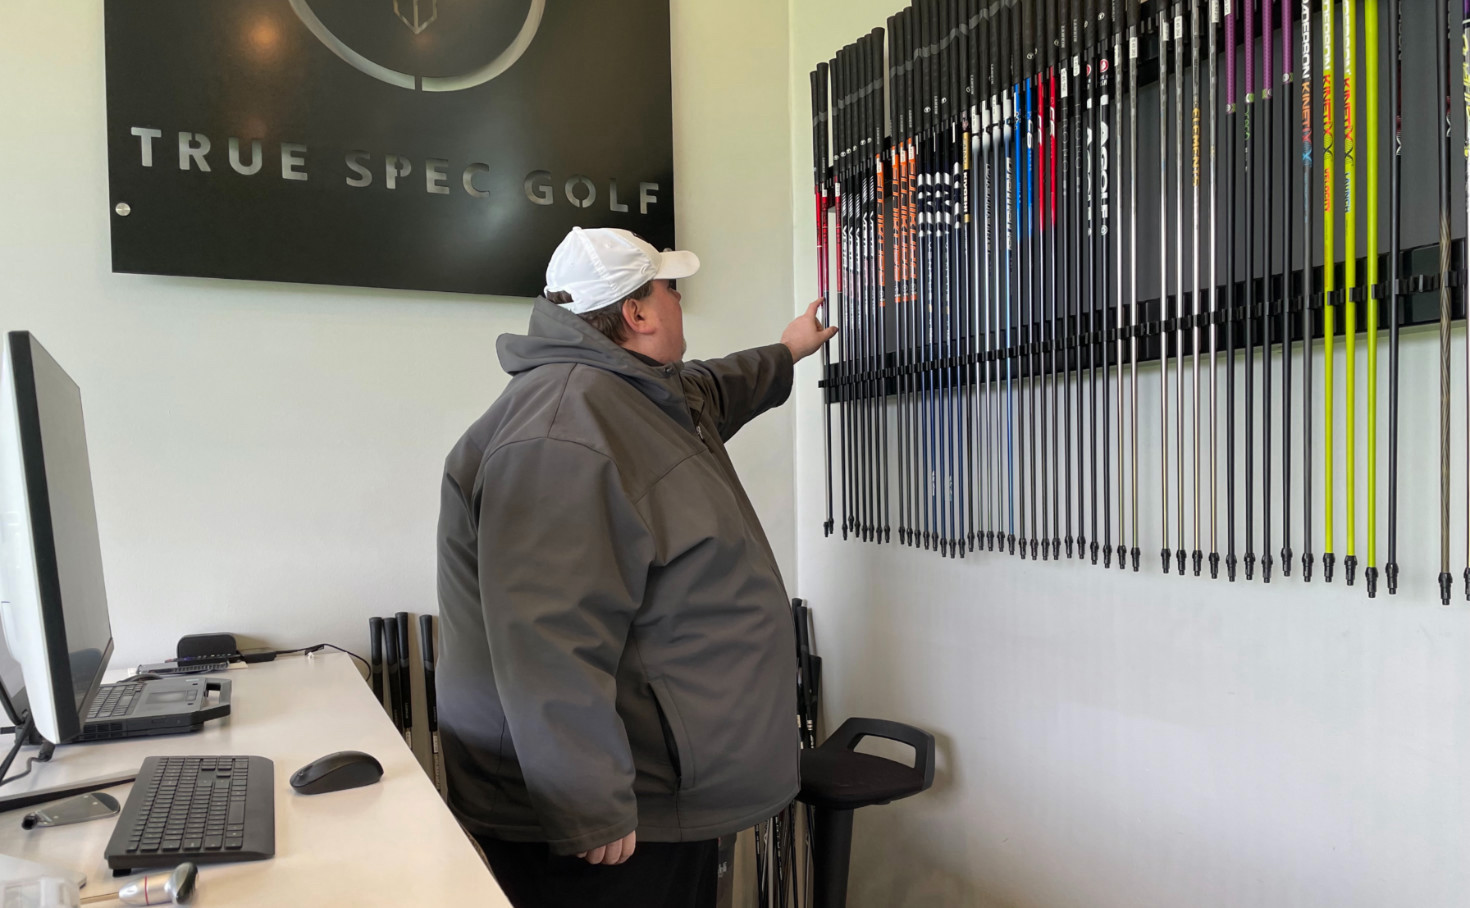 Shafts come in a myriad of weights, flexes and kick points to fit all sorts of golfers.